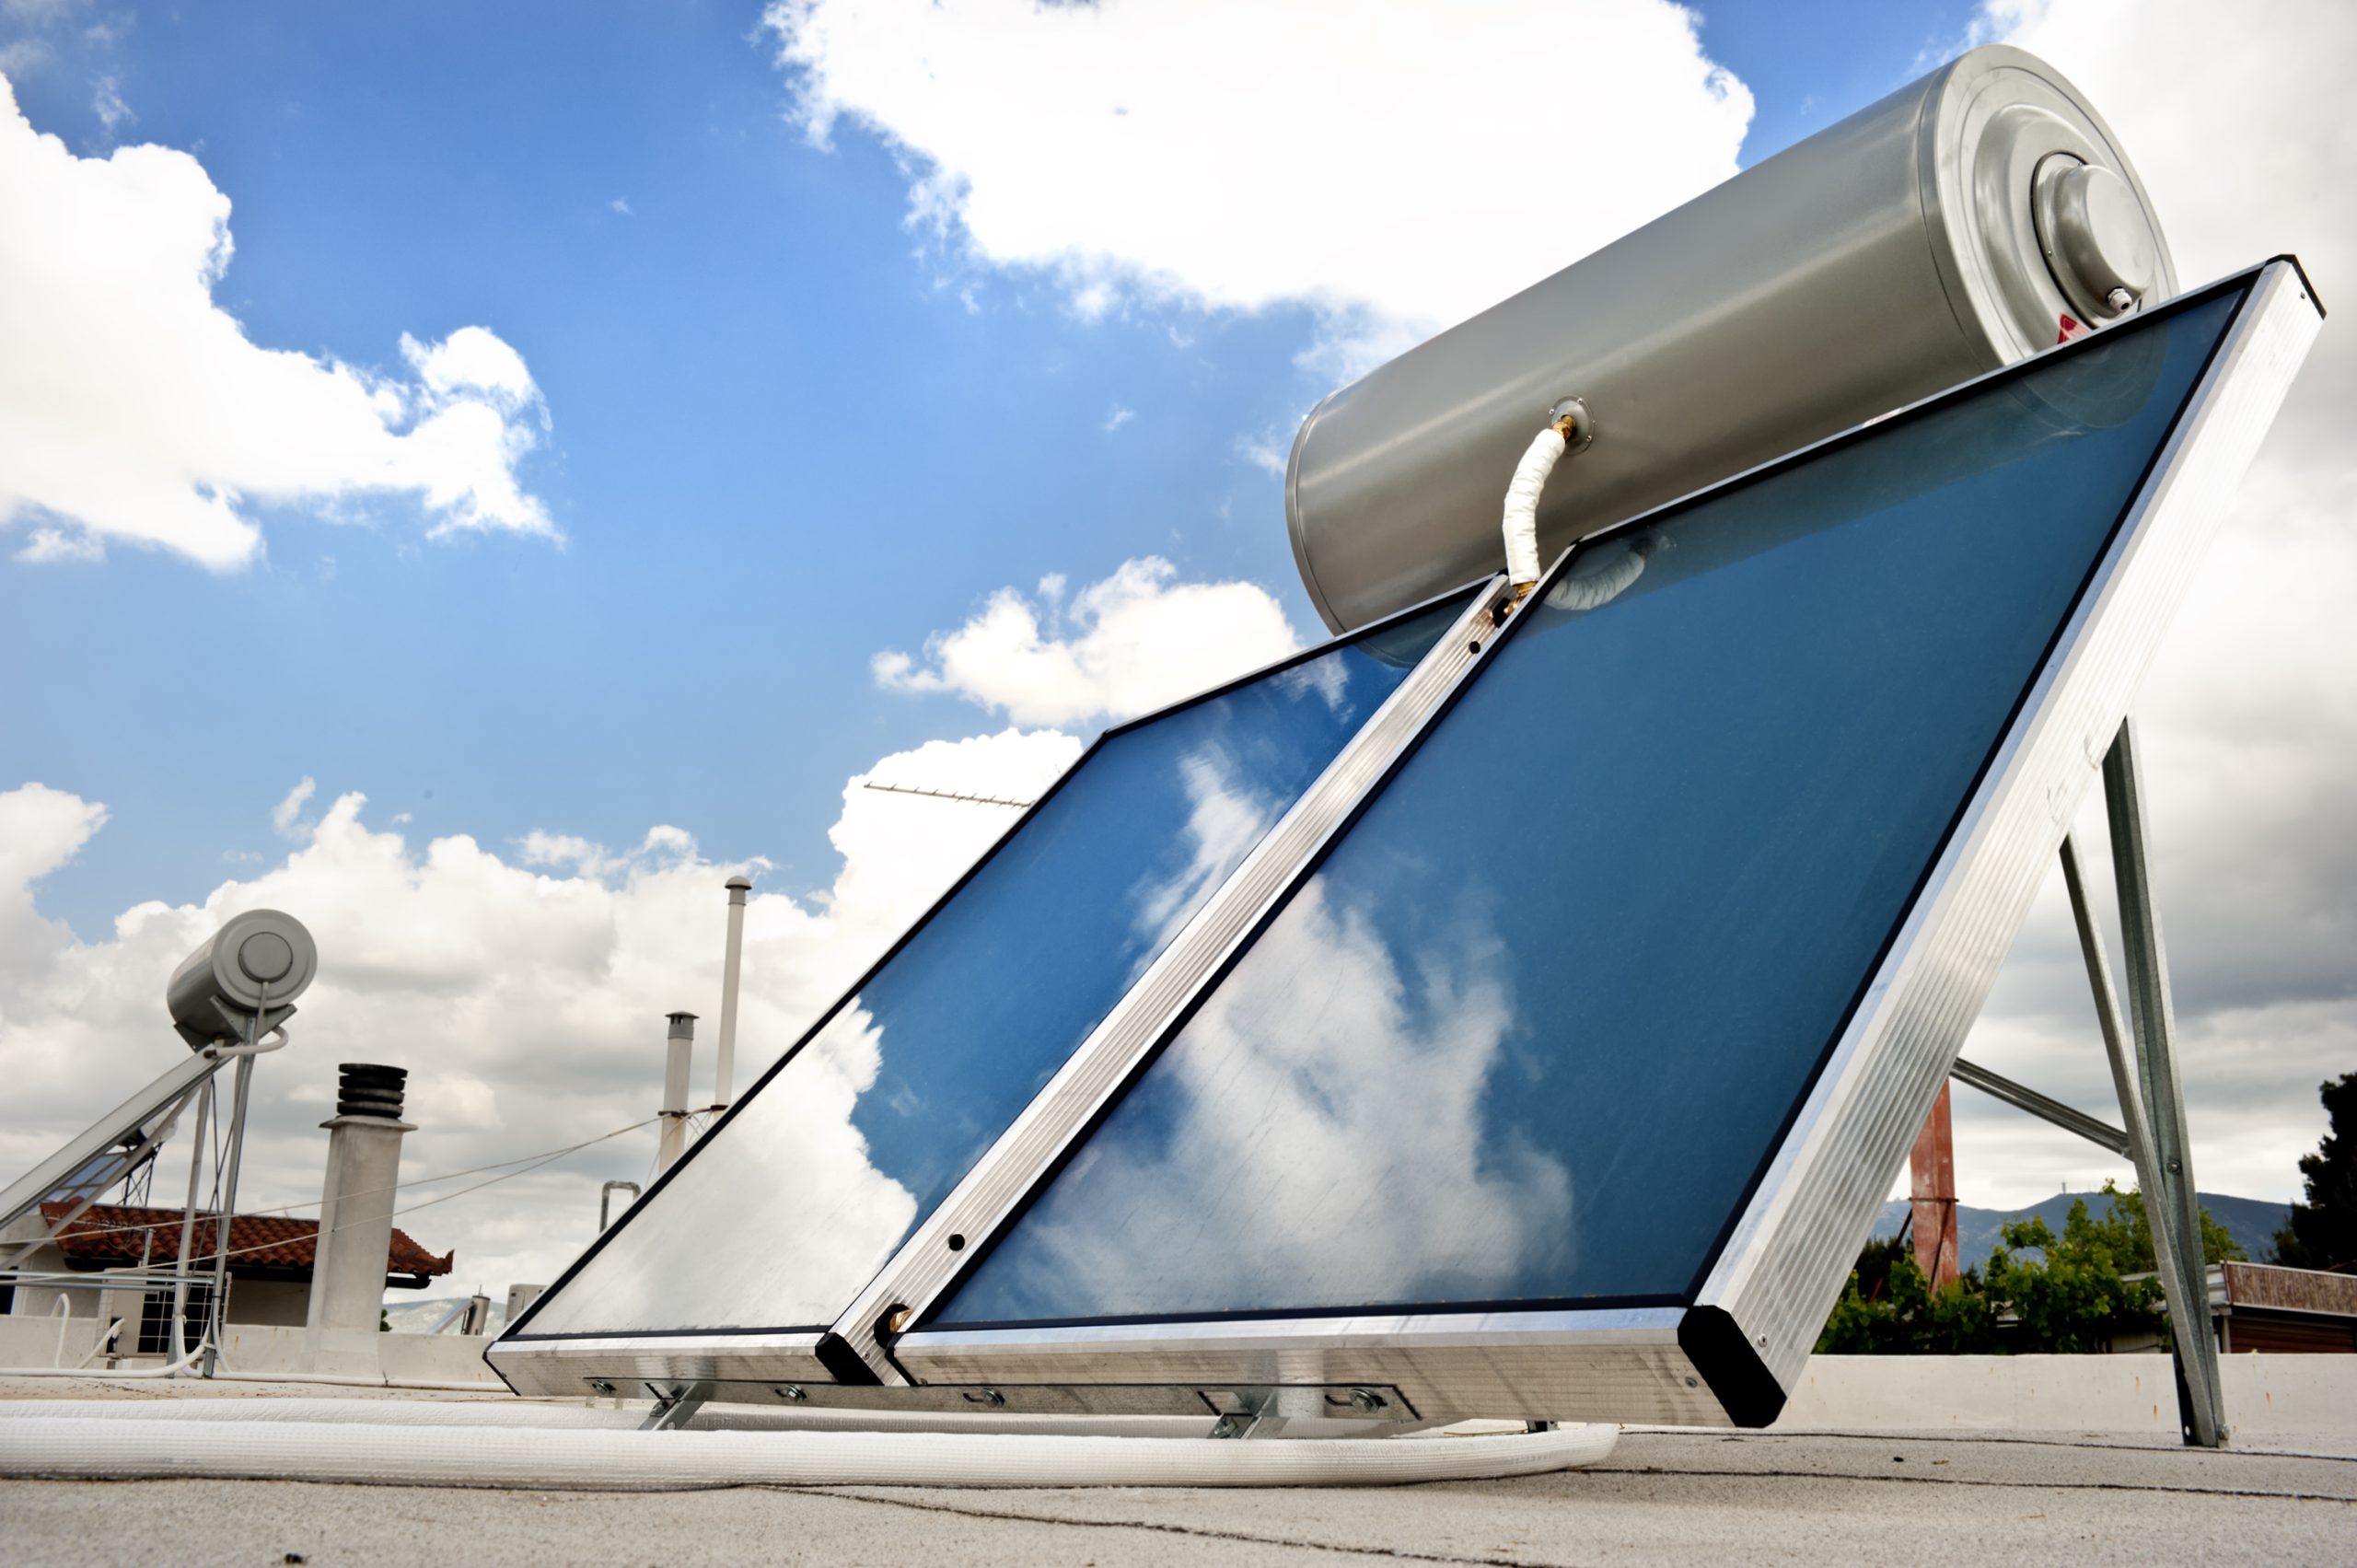 Why are Solar Water Heaters Used?